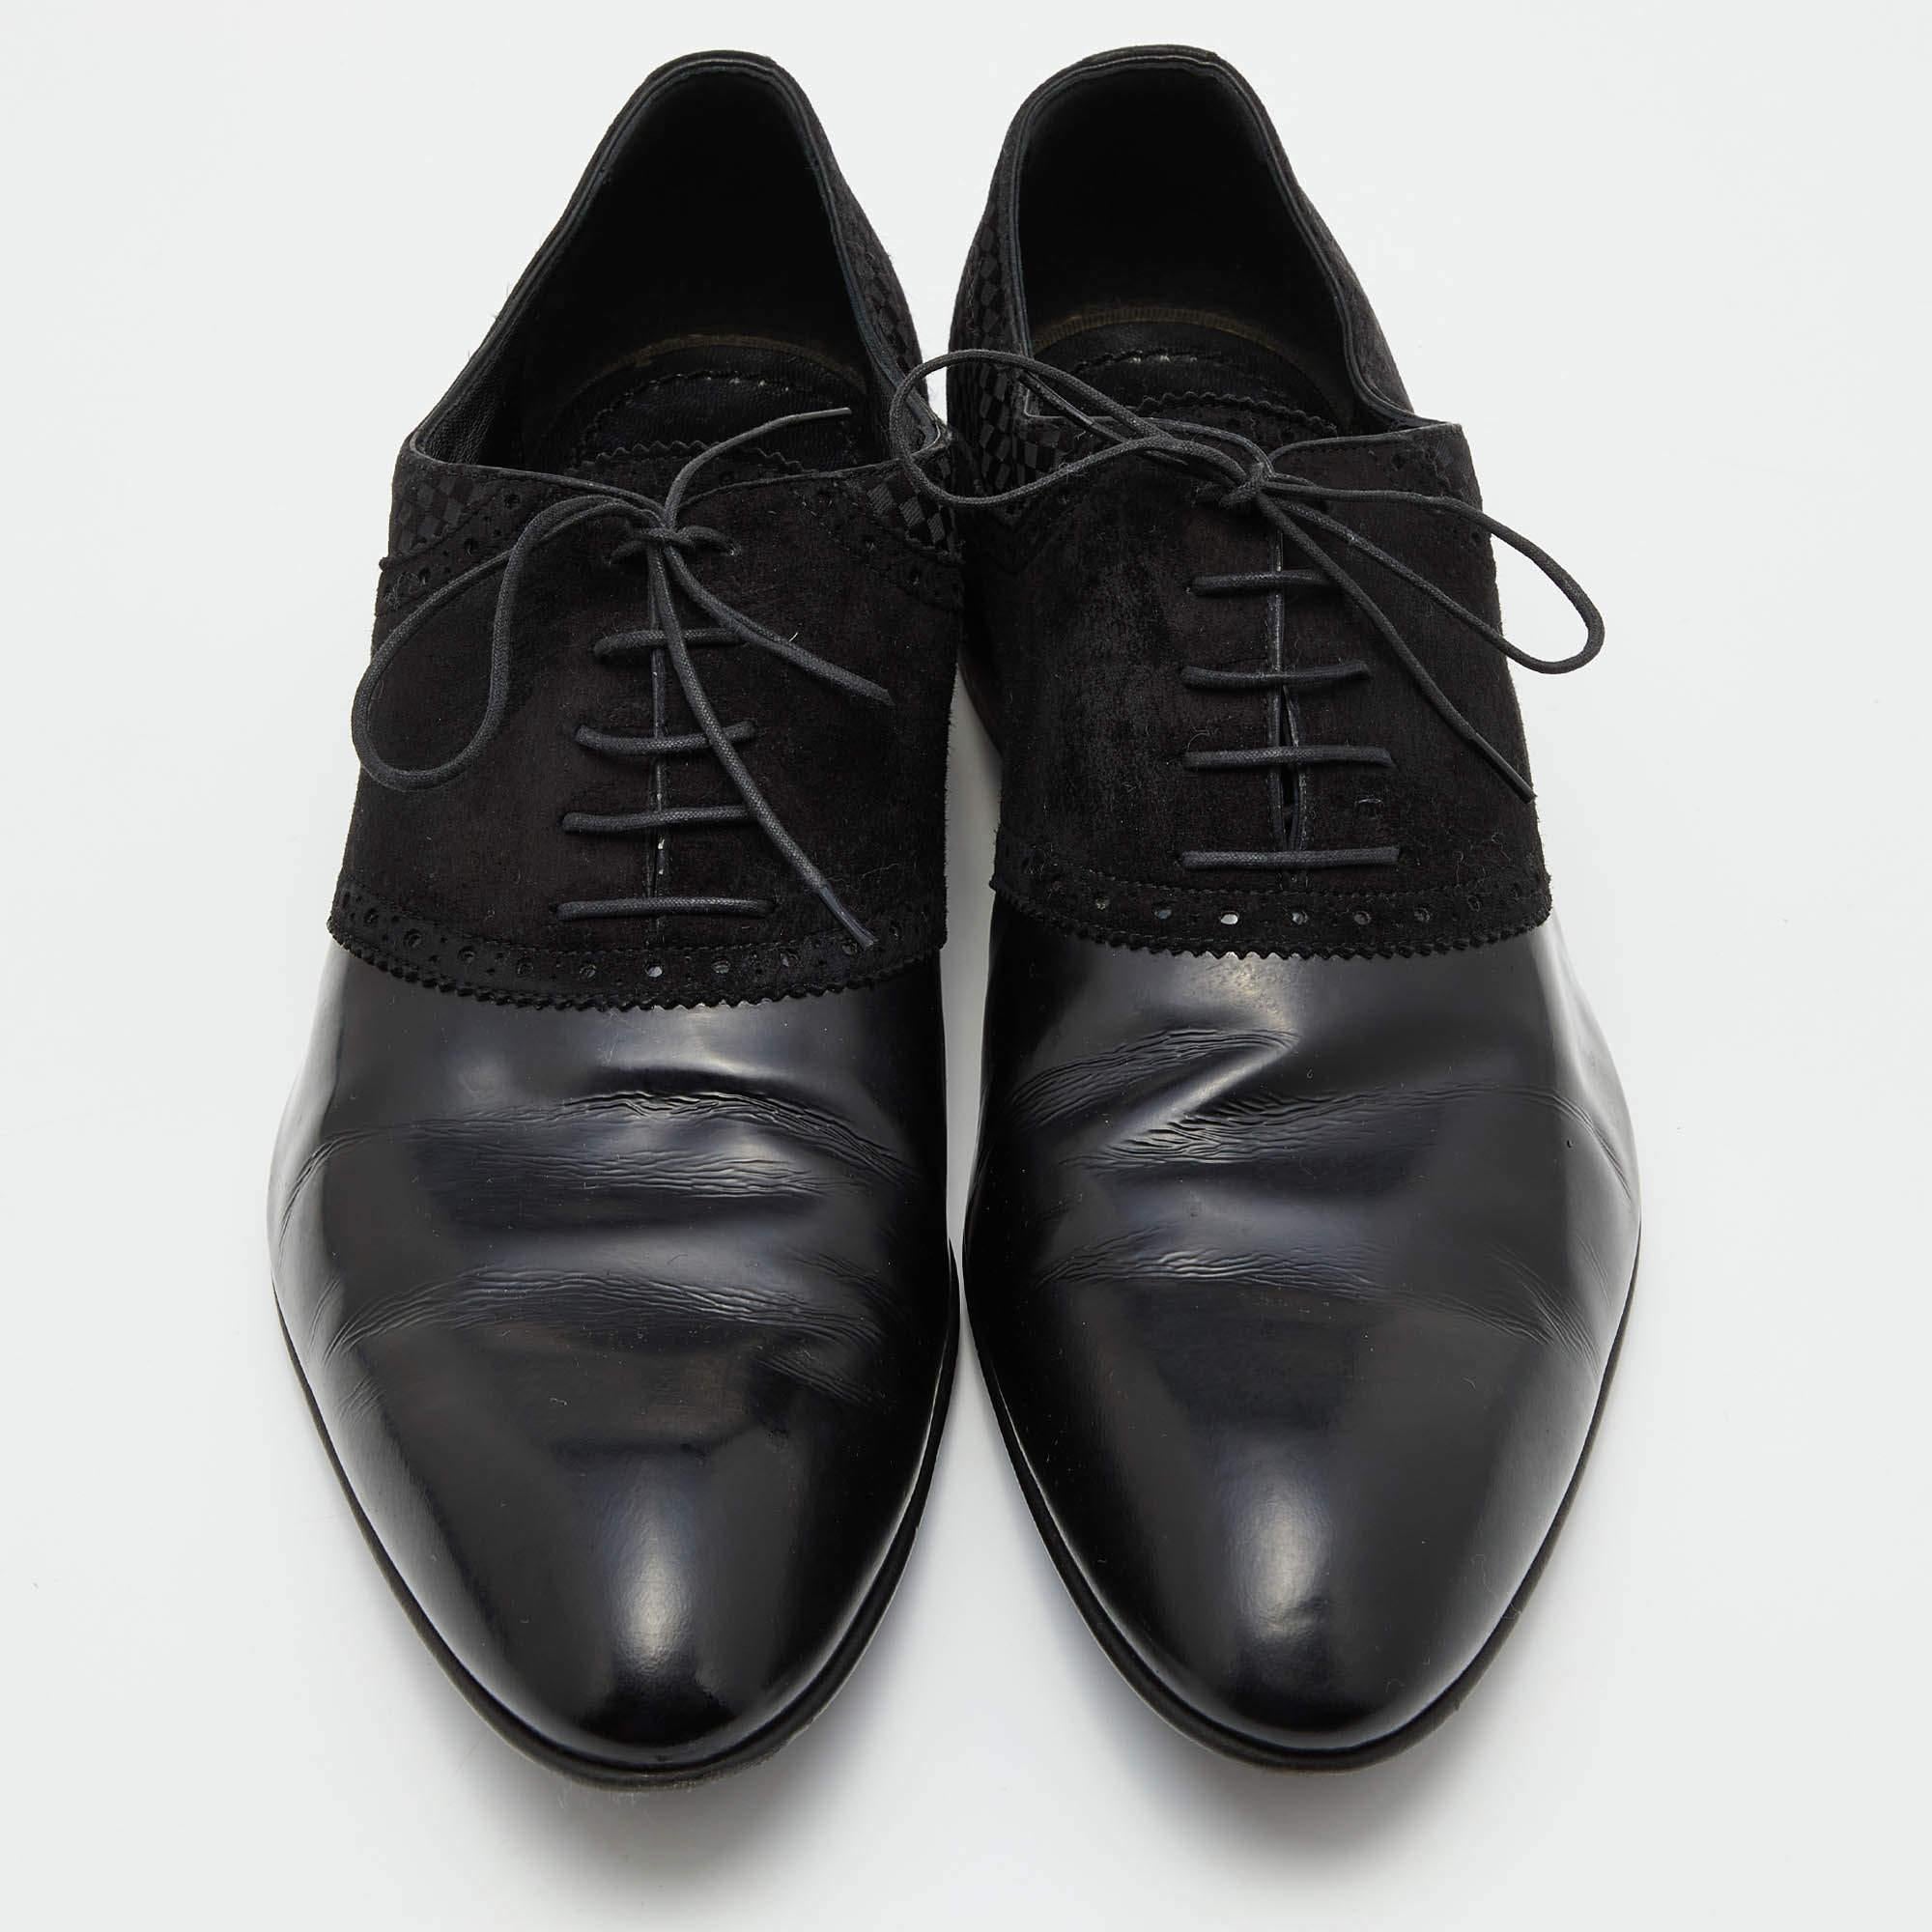 Louis Vuitton Black Damier Fabric, Suede and Leather Lace Up Oxfords Size 43 3